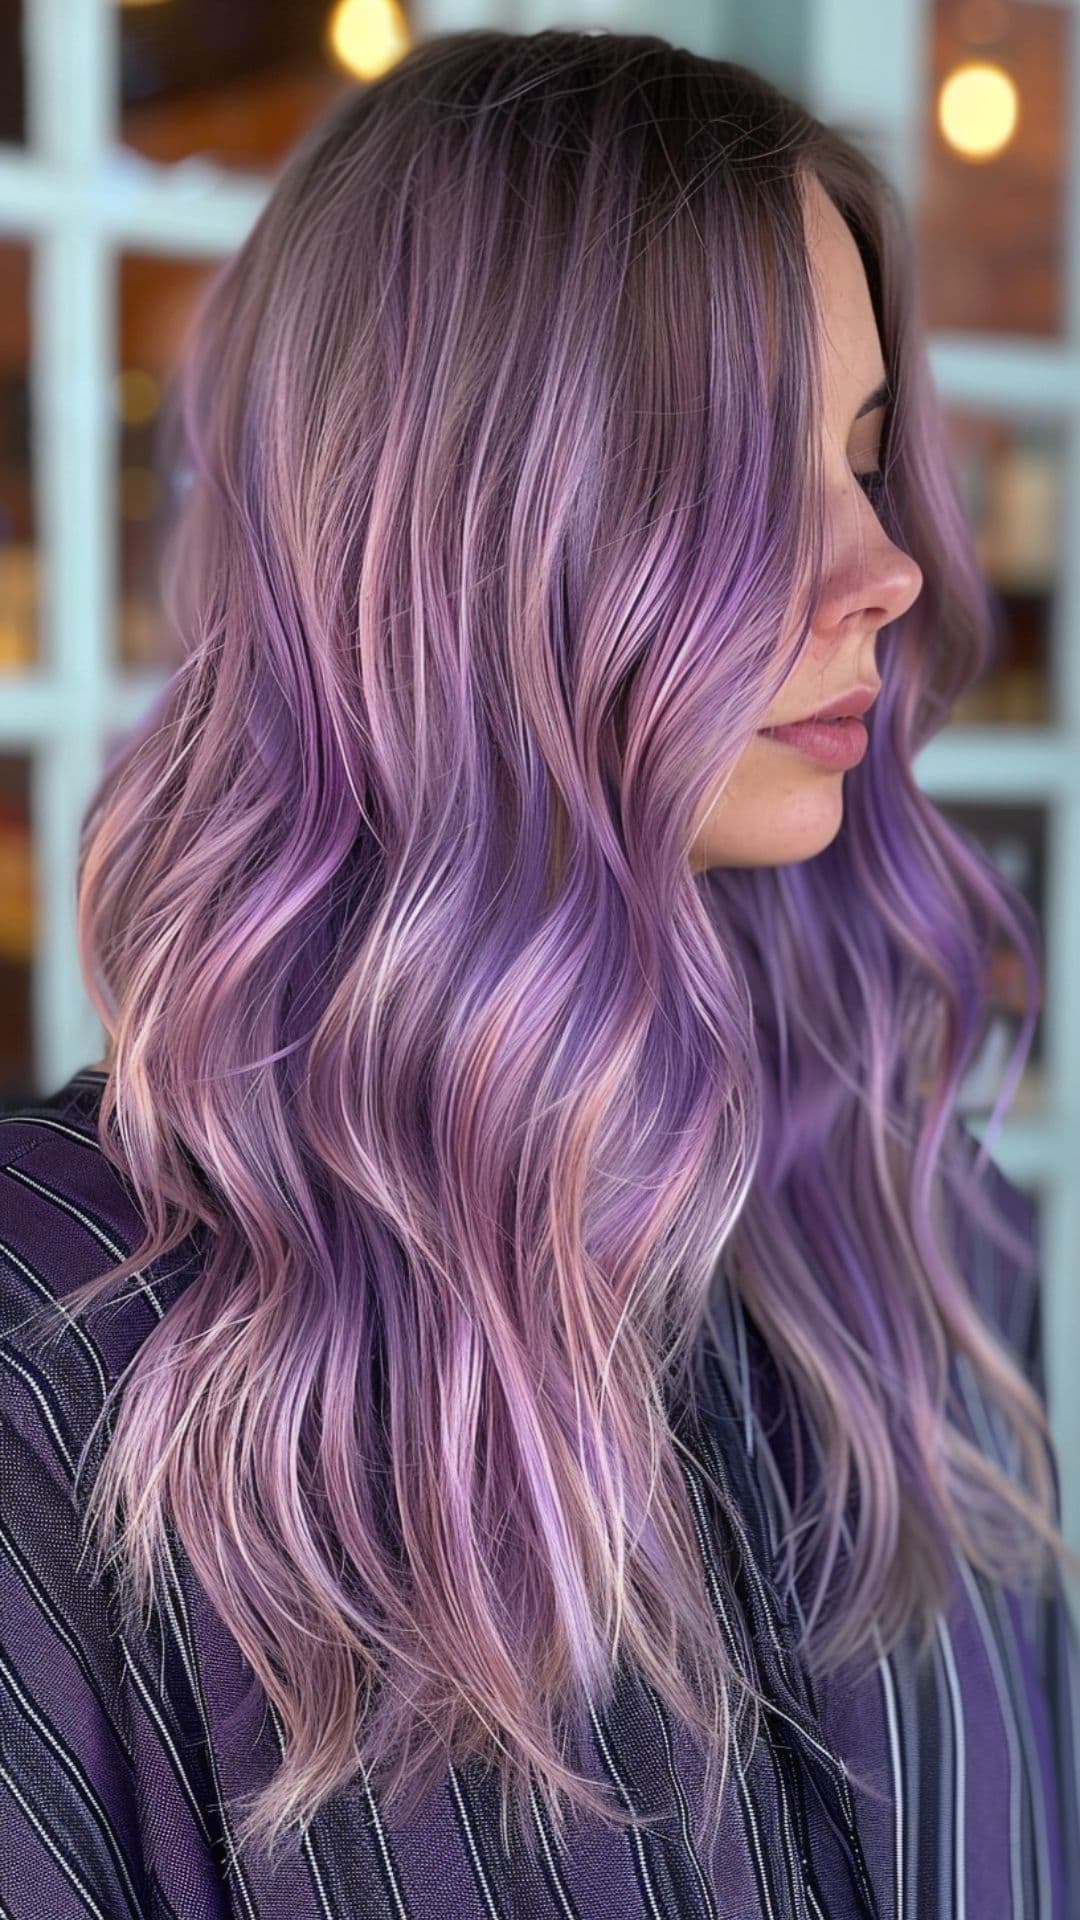 A woman modelling a purple hair with lavender highlights.